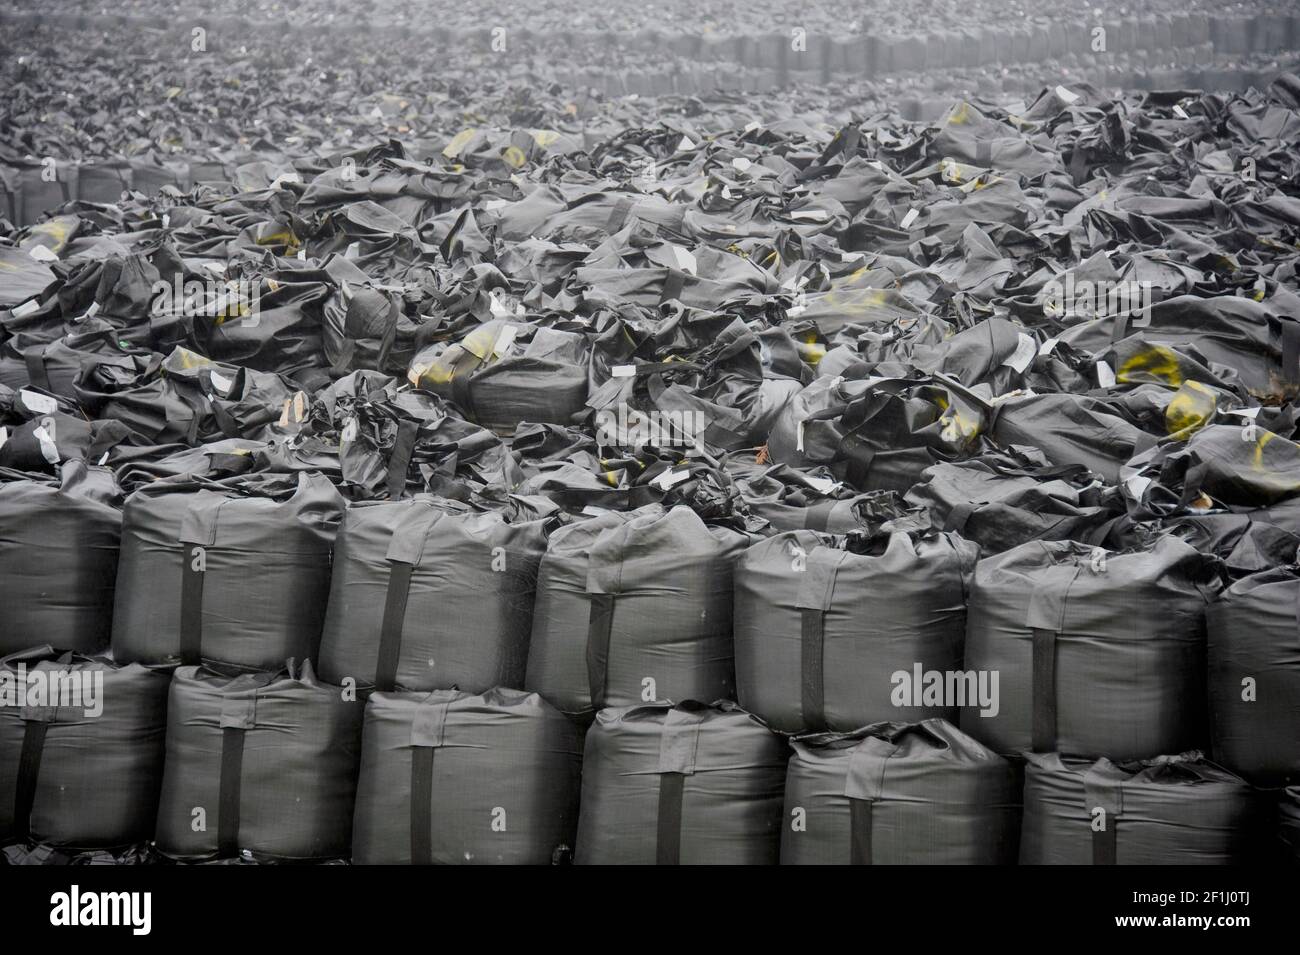 Photo shows tens of thousands of bags of nuclear contaminated soil and weeds that have been stacked on a temporary storage zone near Fukushima Daiichi Nuclear Power Plant in Okuma, Fukushima Prefecture, Japan in June 2013. Today thousands of these disposal sites can be found dotted around the prefecture and decontamination efforts, as well as decommissioning of the nuclear plant, continue. Photographer: Robert Gilhooly Stock Photo